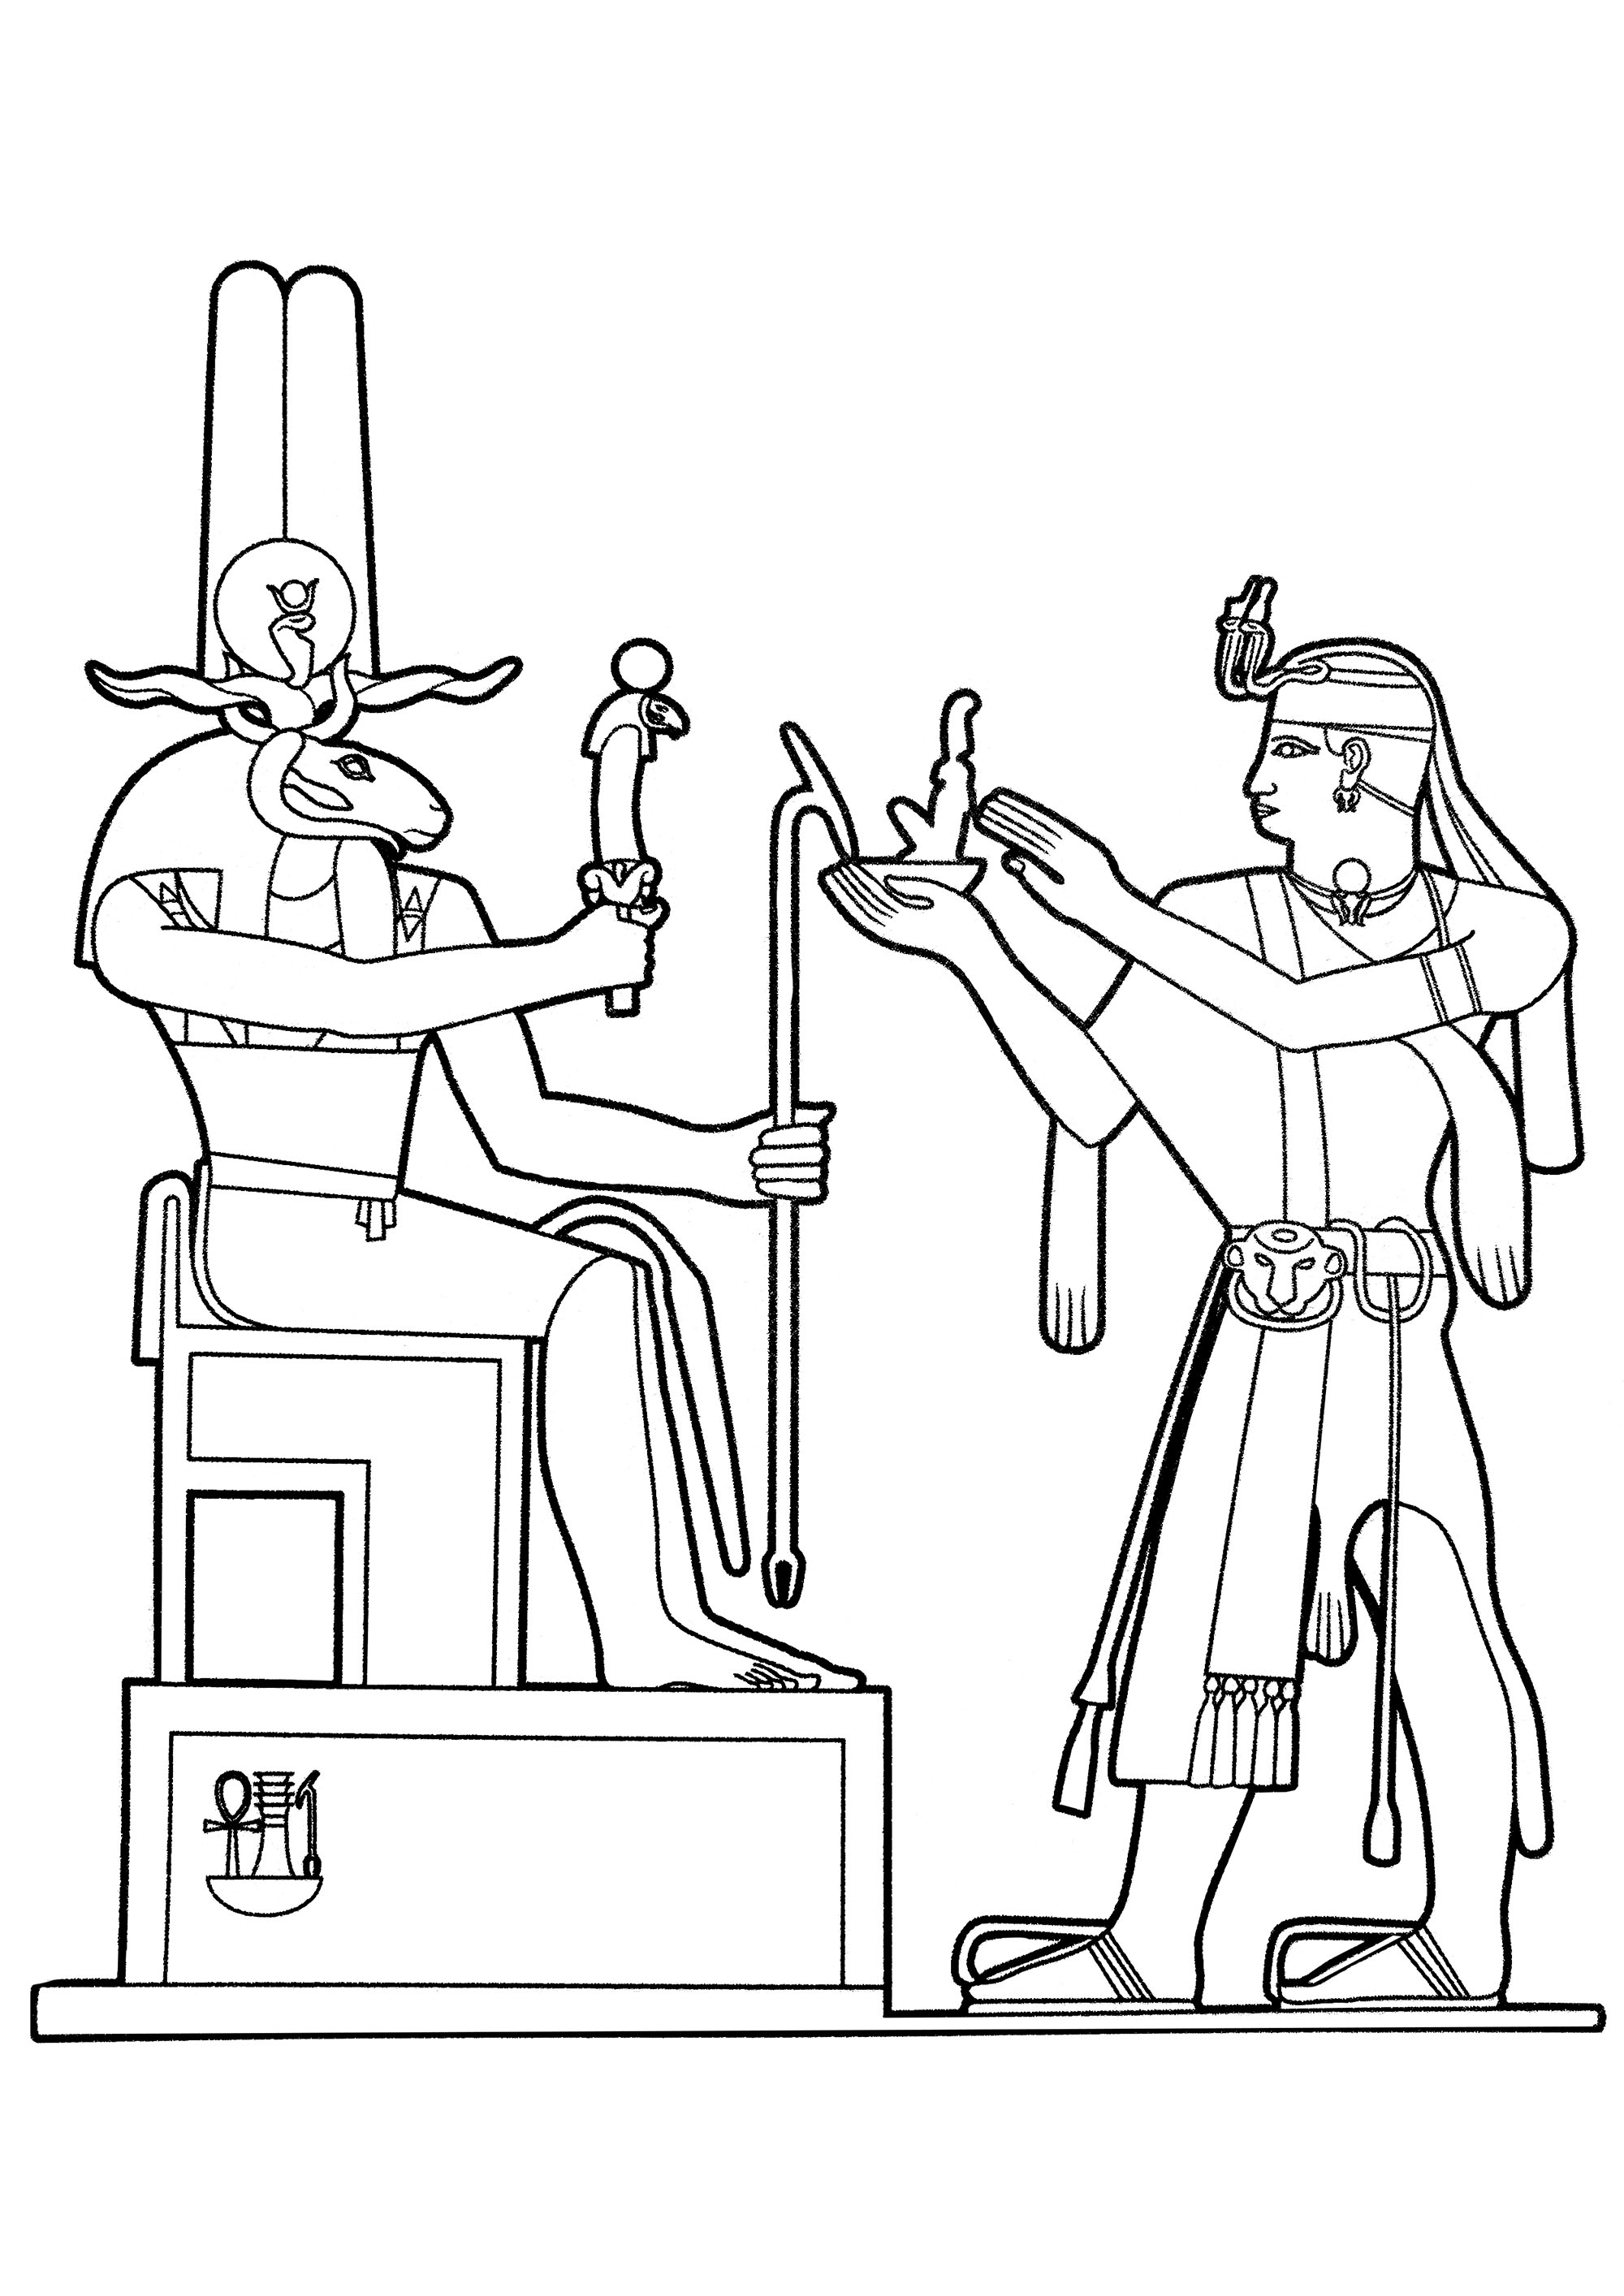 The Egyptian god Khnum receiving an offering. .Khnum is a straight-horned, ram-headed god who is often depicted creating humans on his potter's wheel, Khnum emerged from two caverns in the subterranean world in the ocean of Nun.